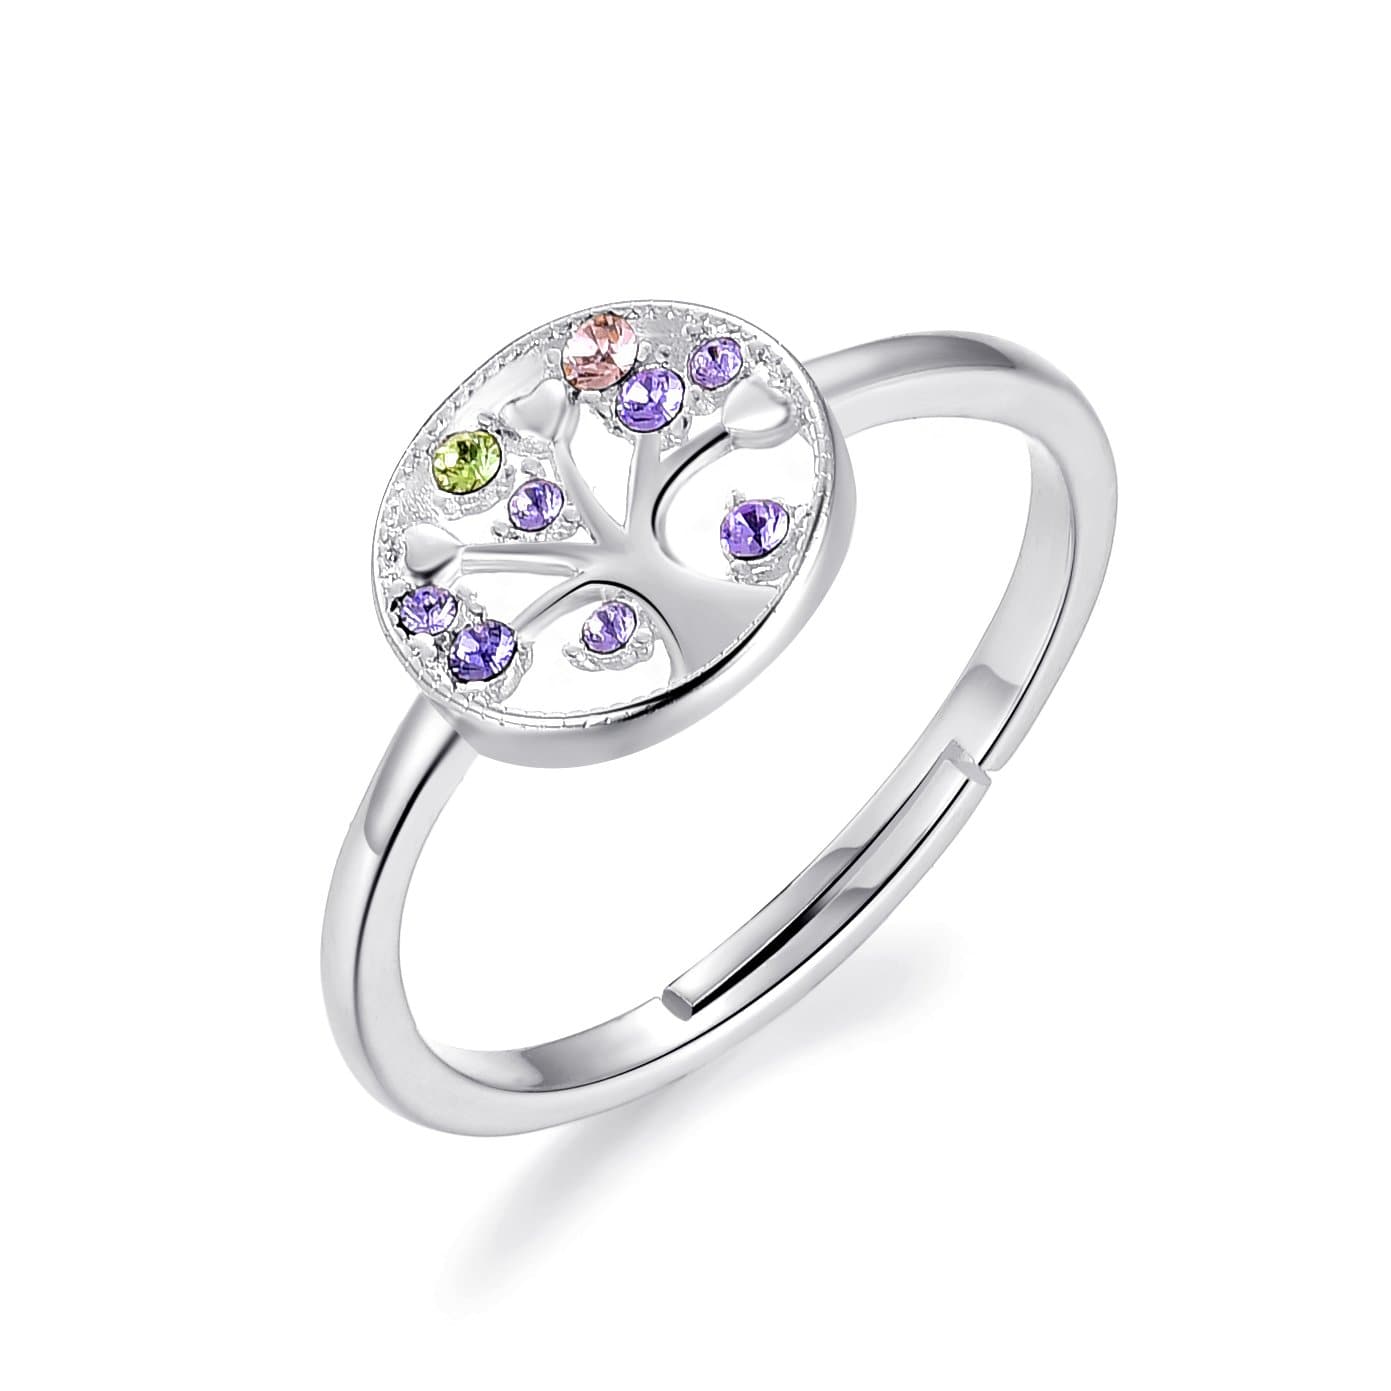 Silver Plated Chakra Tree of Life Ring Created with Zircondia® Crystals by Philip Jones Jewellery